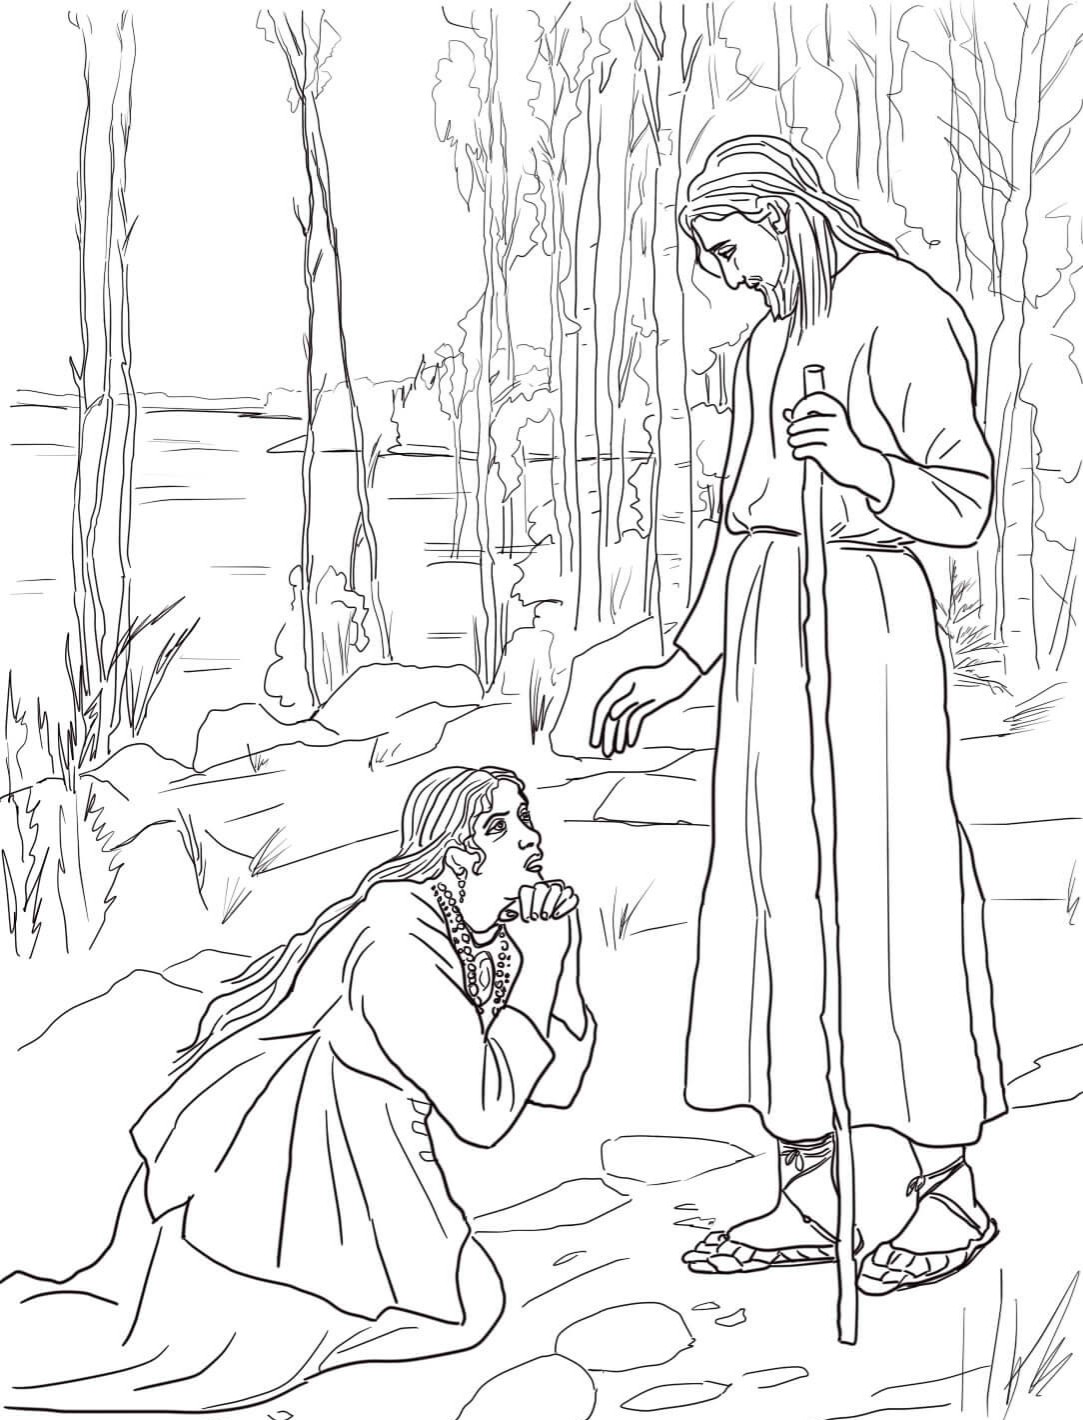 mary-magdalene-meets-jesus-by-albert-edelfelt-coloring-page